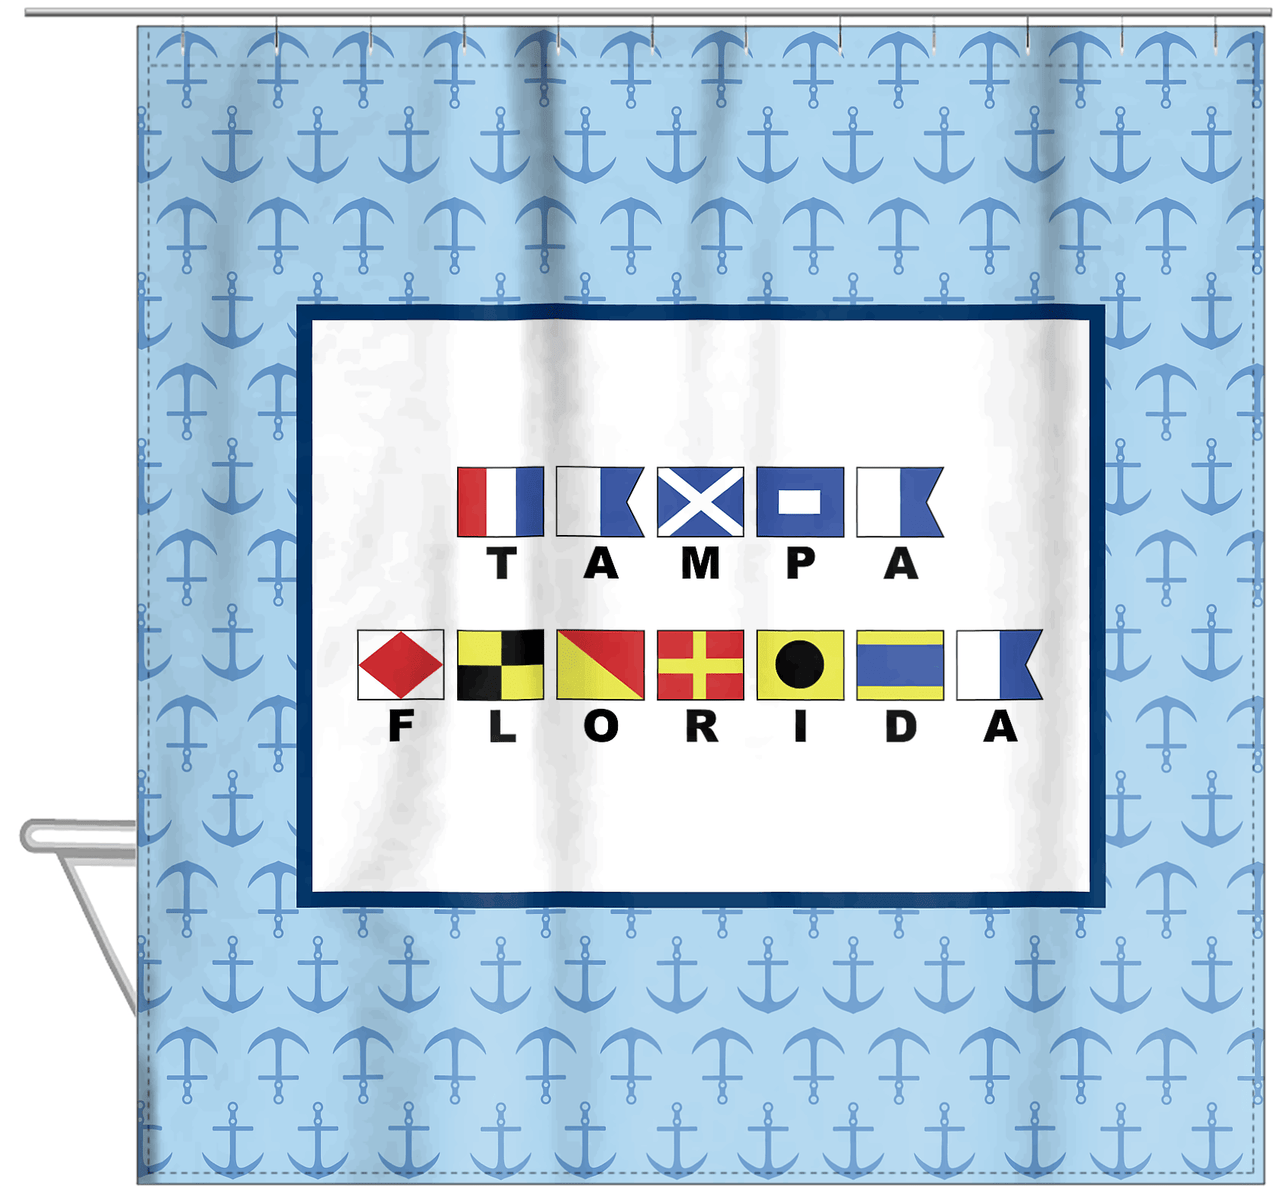 Personalized Nautical Flags Shower Curtain with Anchors - Blue and Navy - Flags with Large Letters - Hanging View